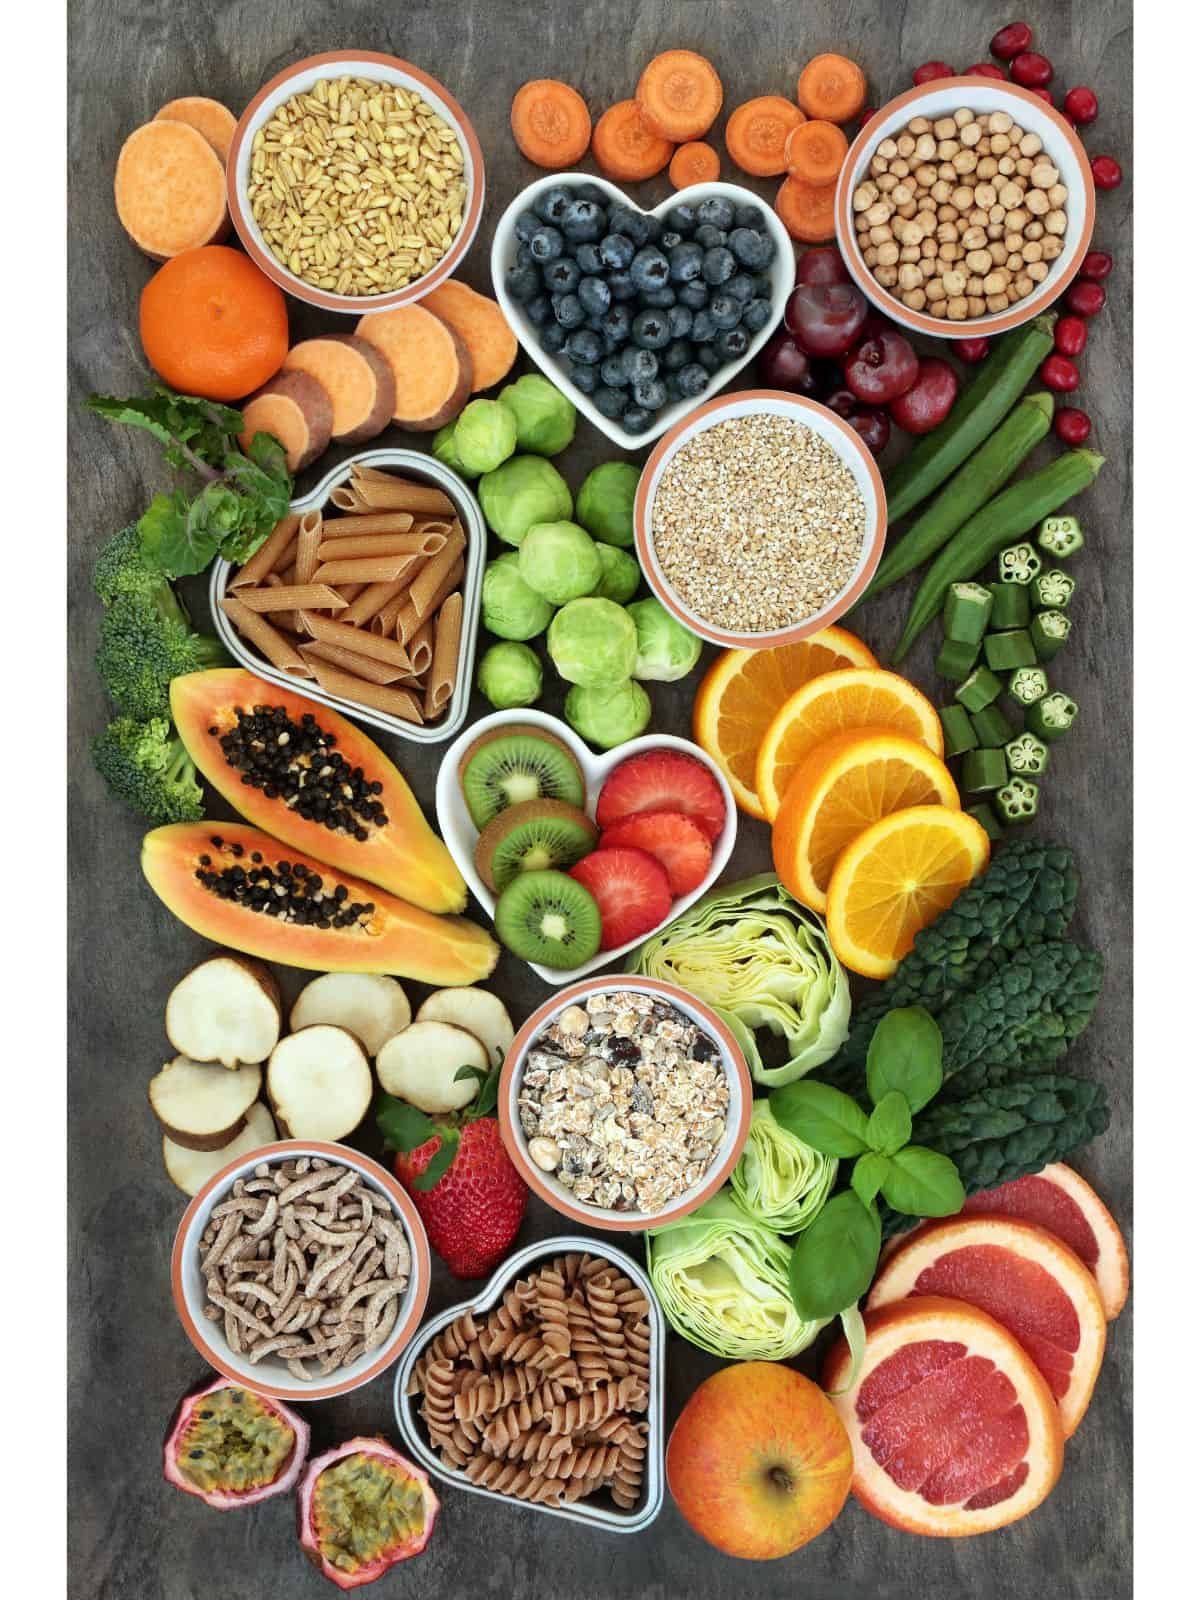 a decorative food design with several healthy and high vibrational foods in ramekins and cut up decoratively. These foods include pomegranate, apple, grapefruit, pasta, oats, cabbage, strawberries, kale, mint, moringa, okra, orange, papaya, kiwi, broccoli, brussel sprout, sweet potato, carrots, nuts, and seeds